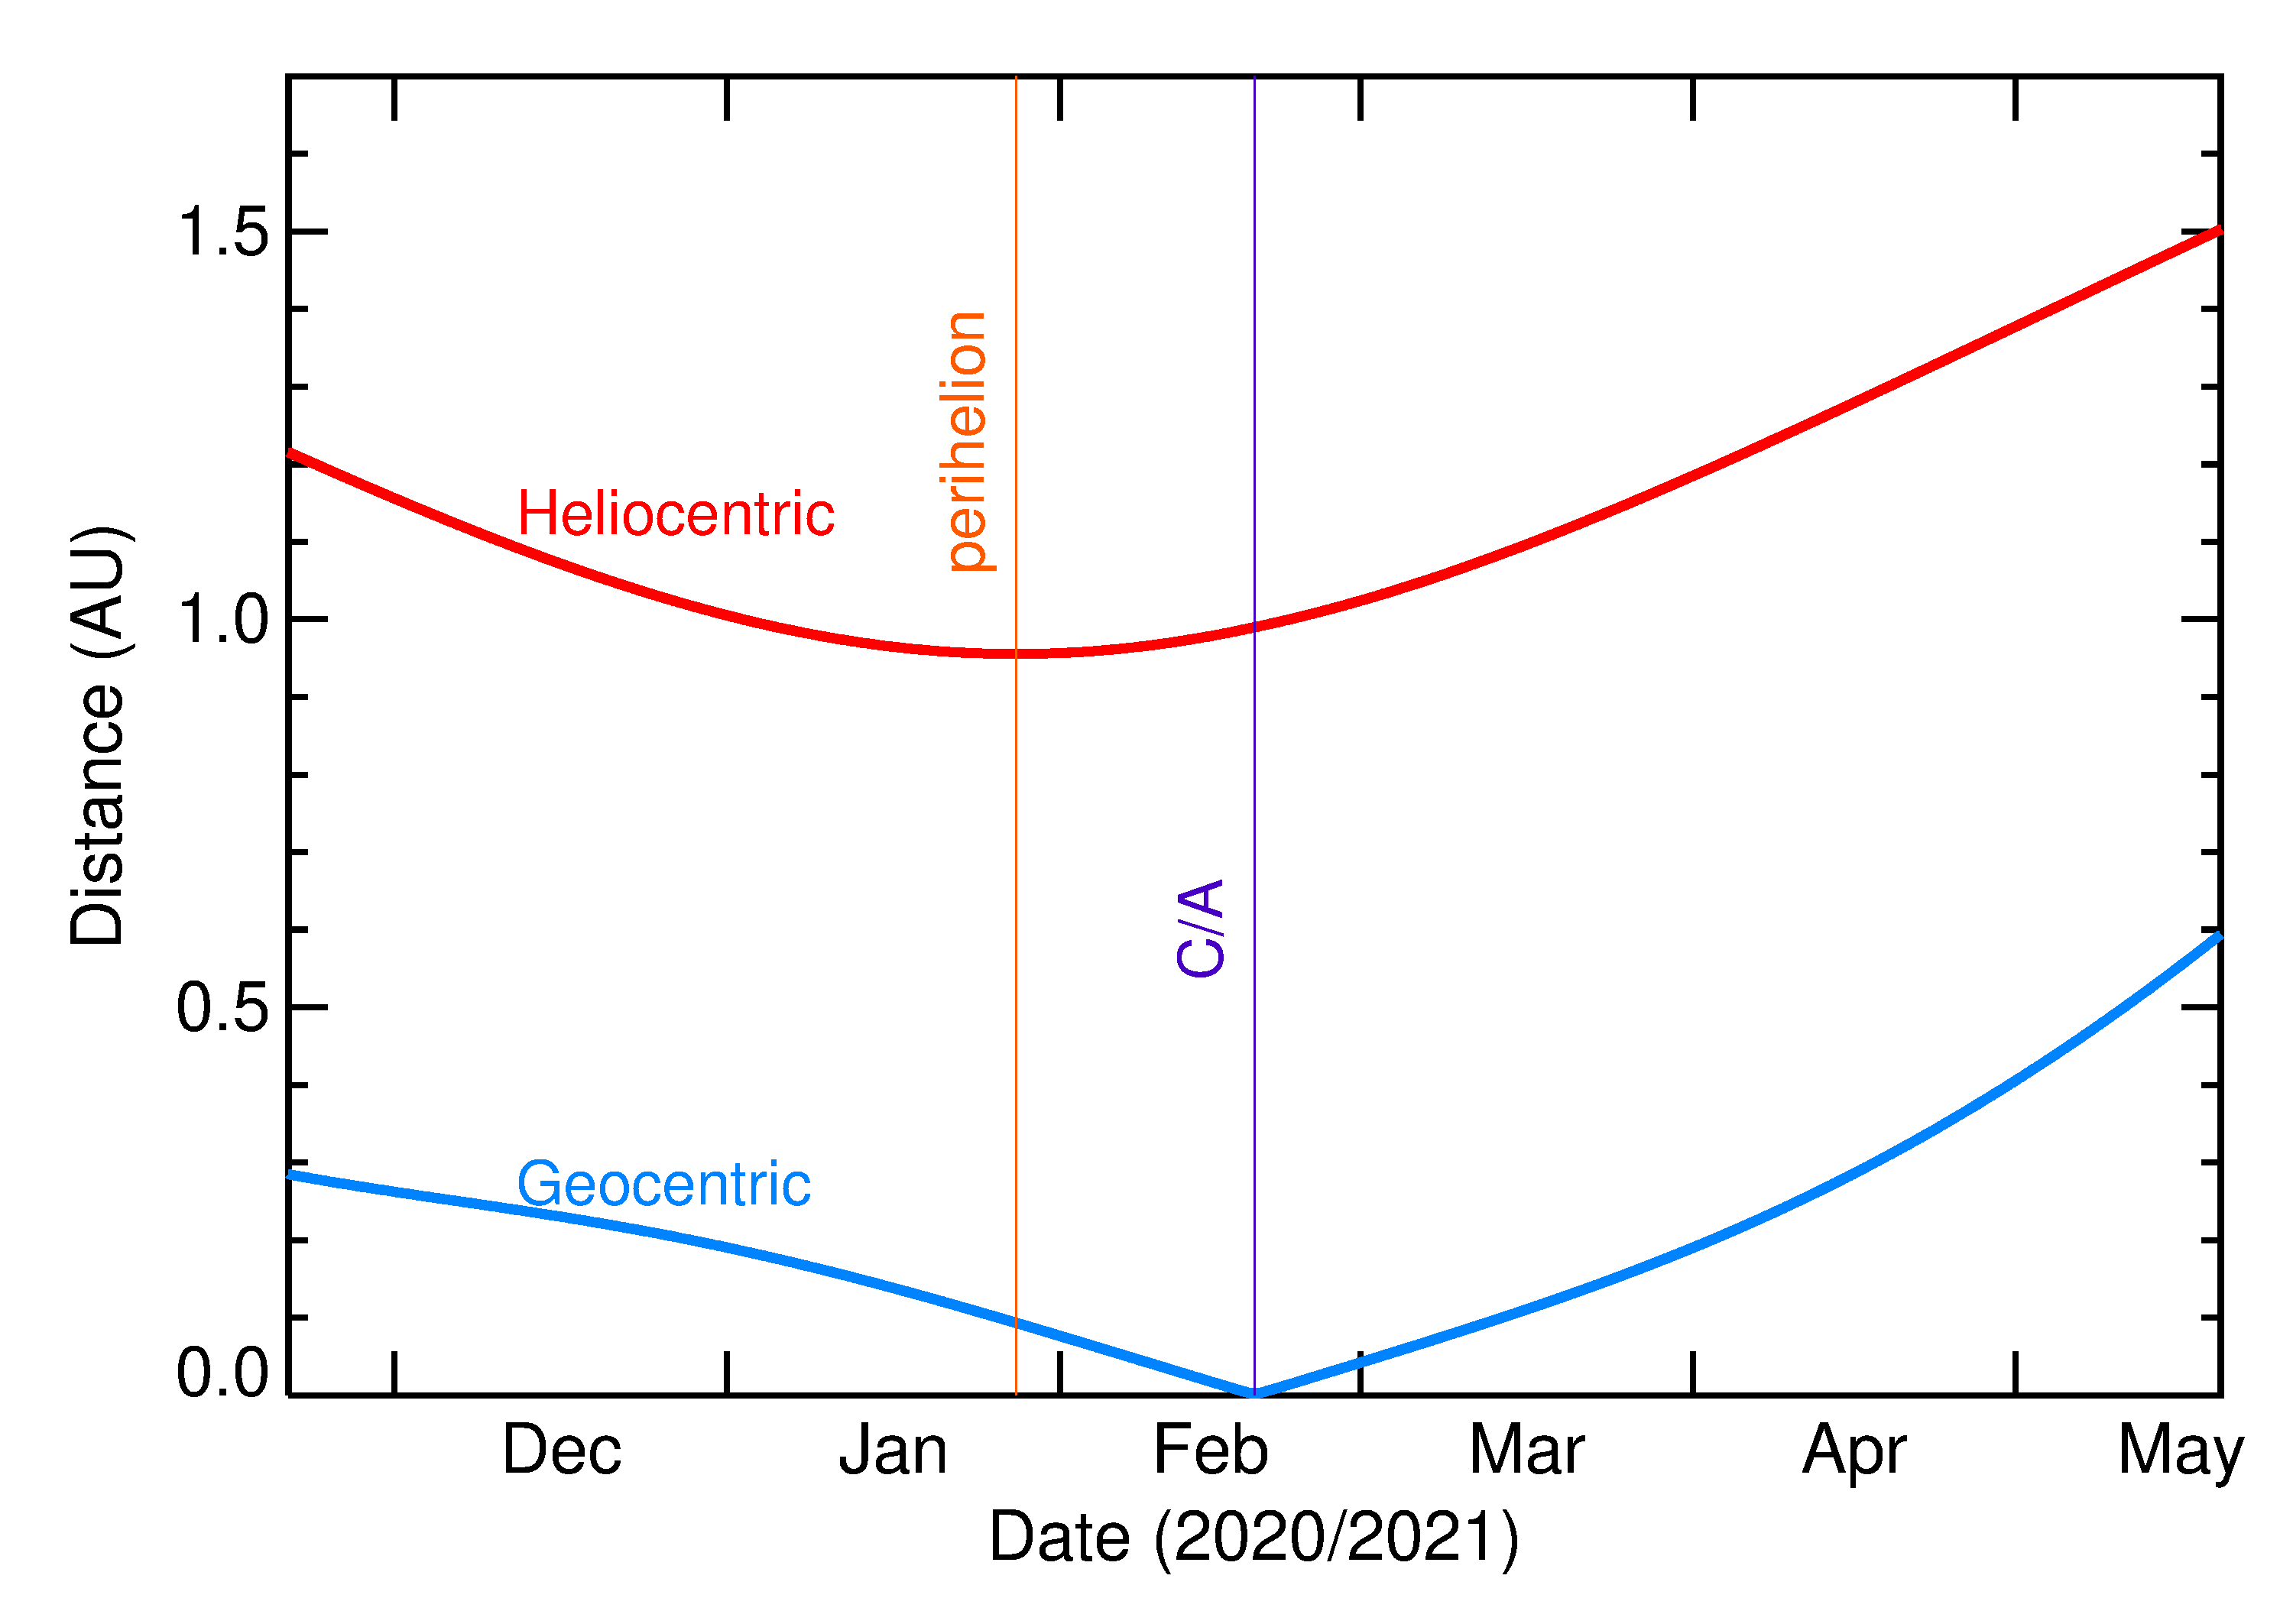 Heliocentric and Geocentric Distances of 2021 DN1 in the months around closest approach